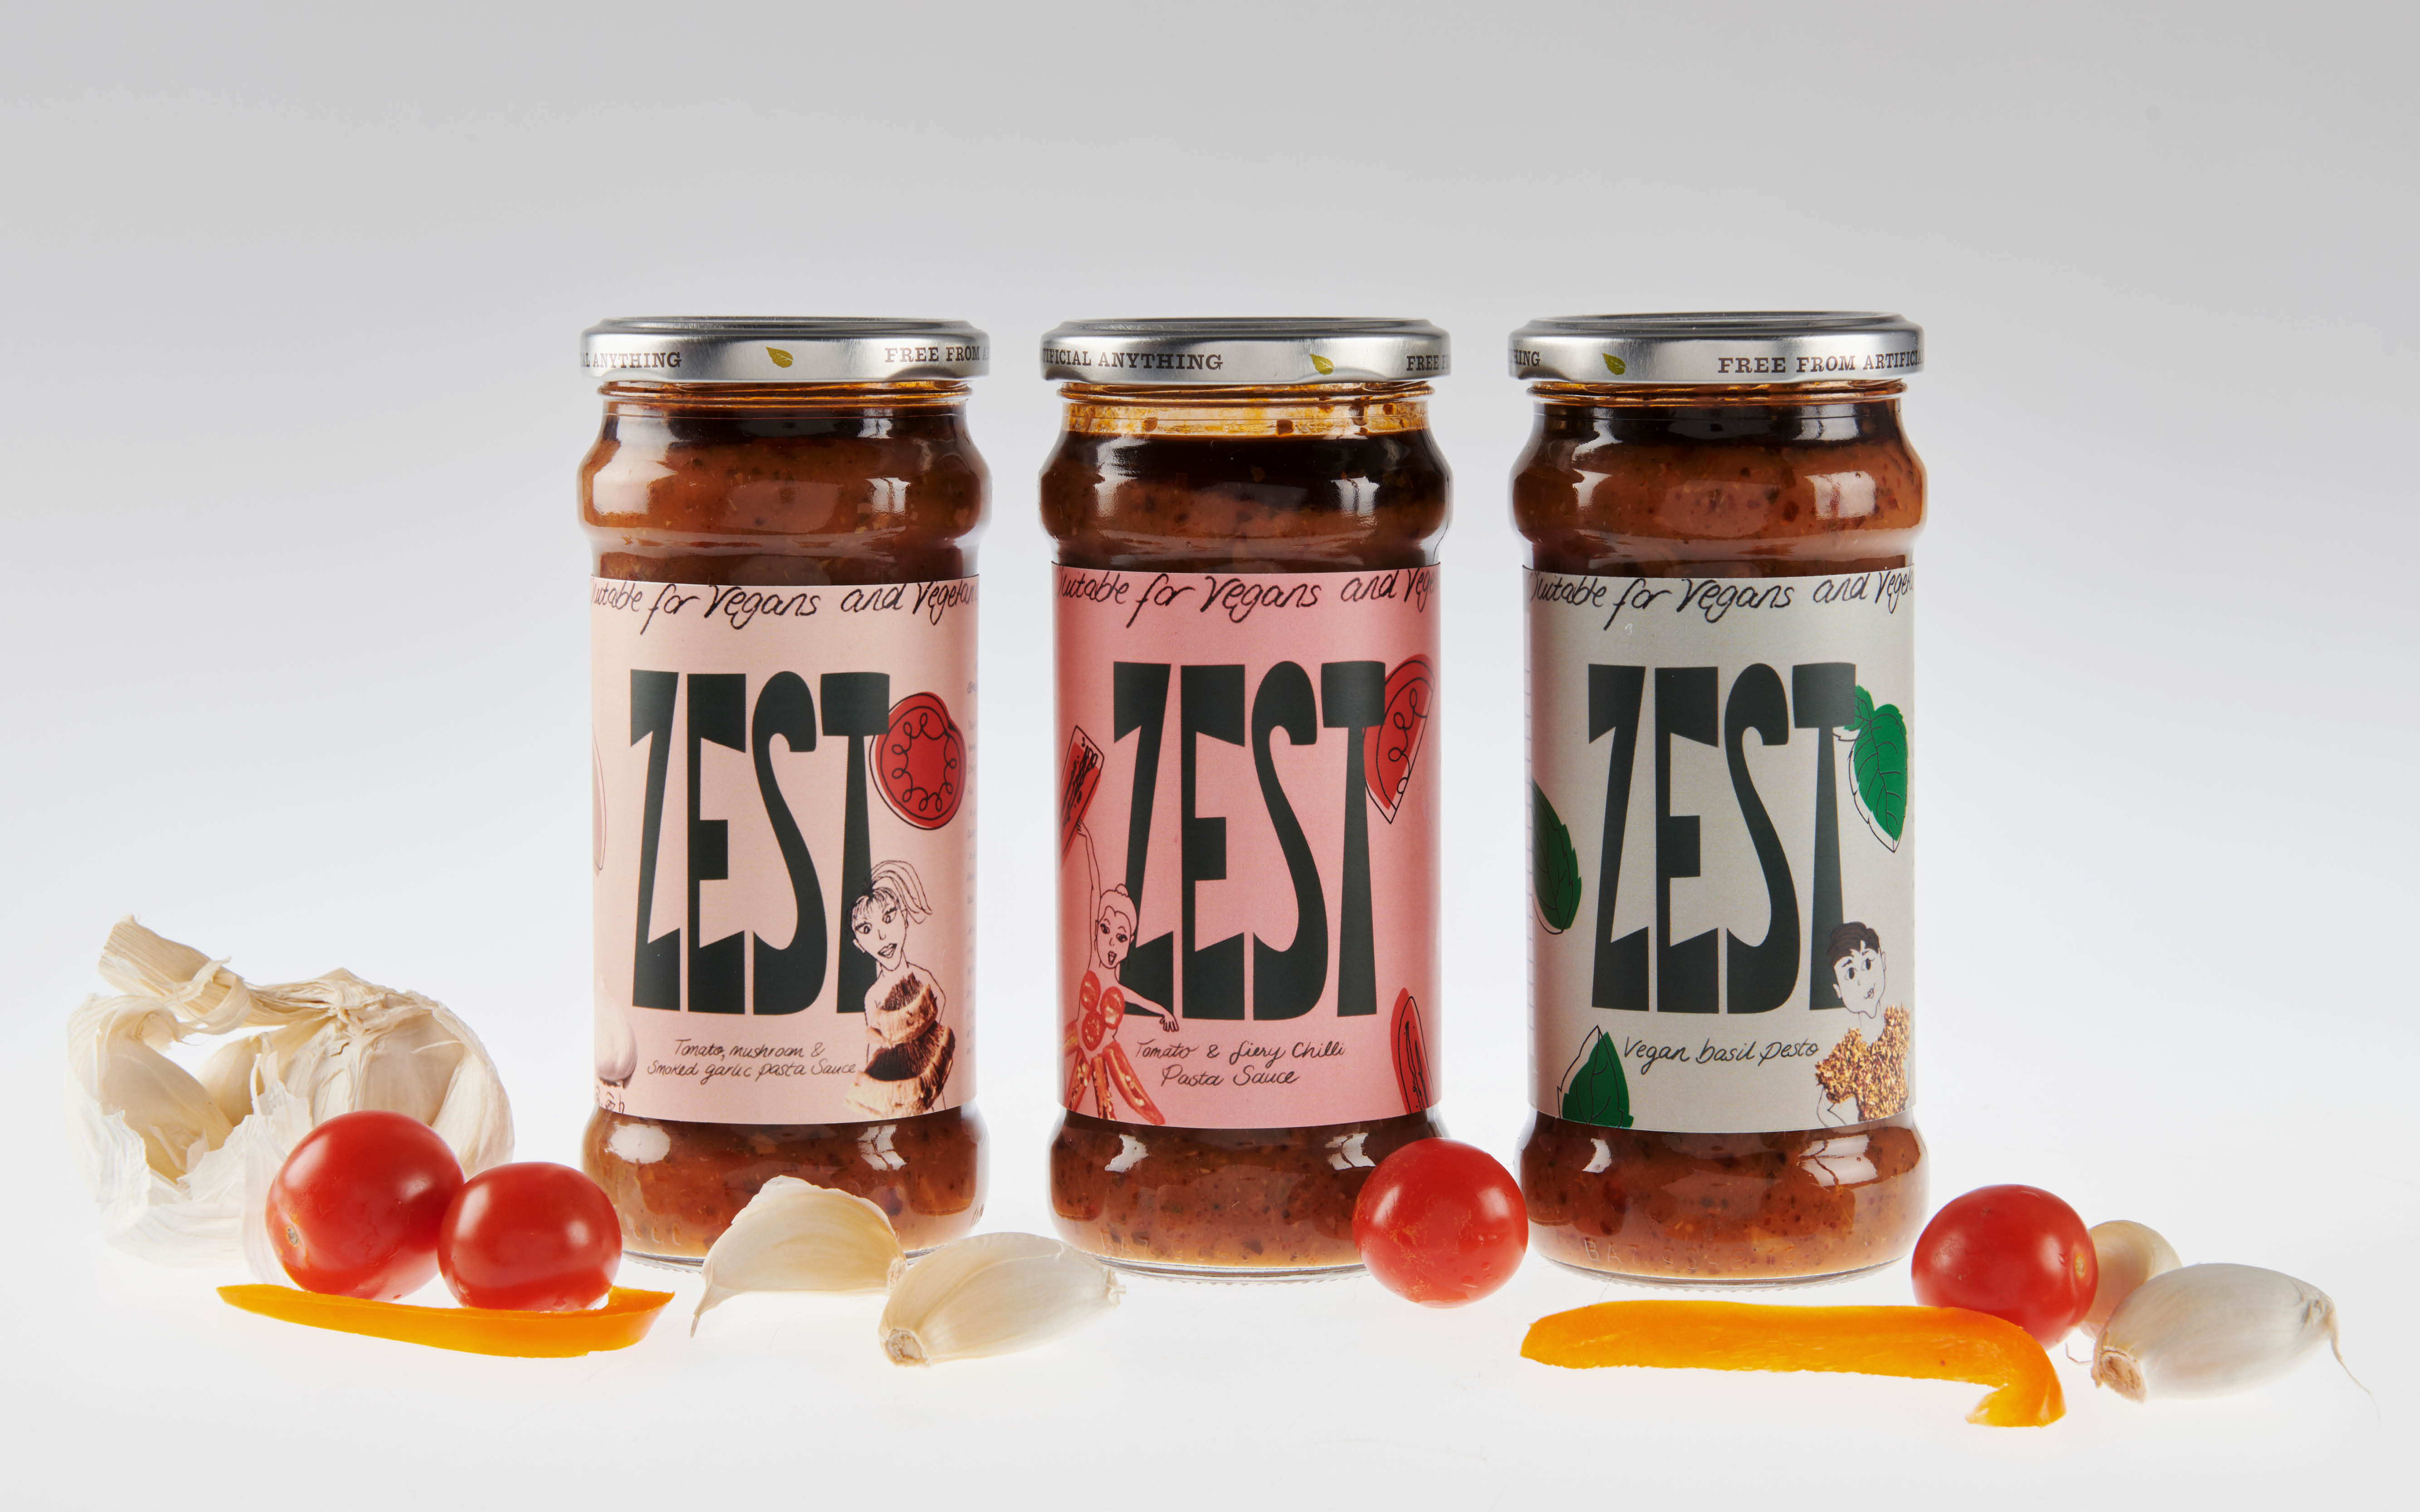 BA Graphic Design work by Lucy Howett. Rebrand for the vegan brand Zest. Focus is to make the brand more exciting and engaging using characters from ingredients in products.